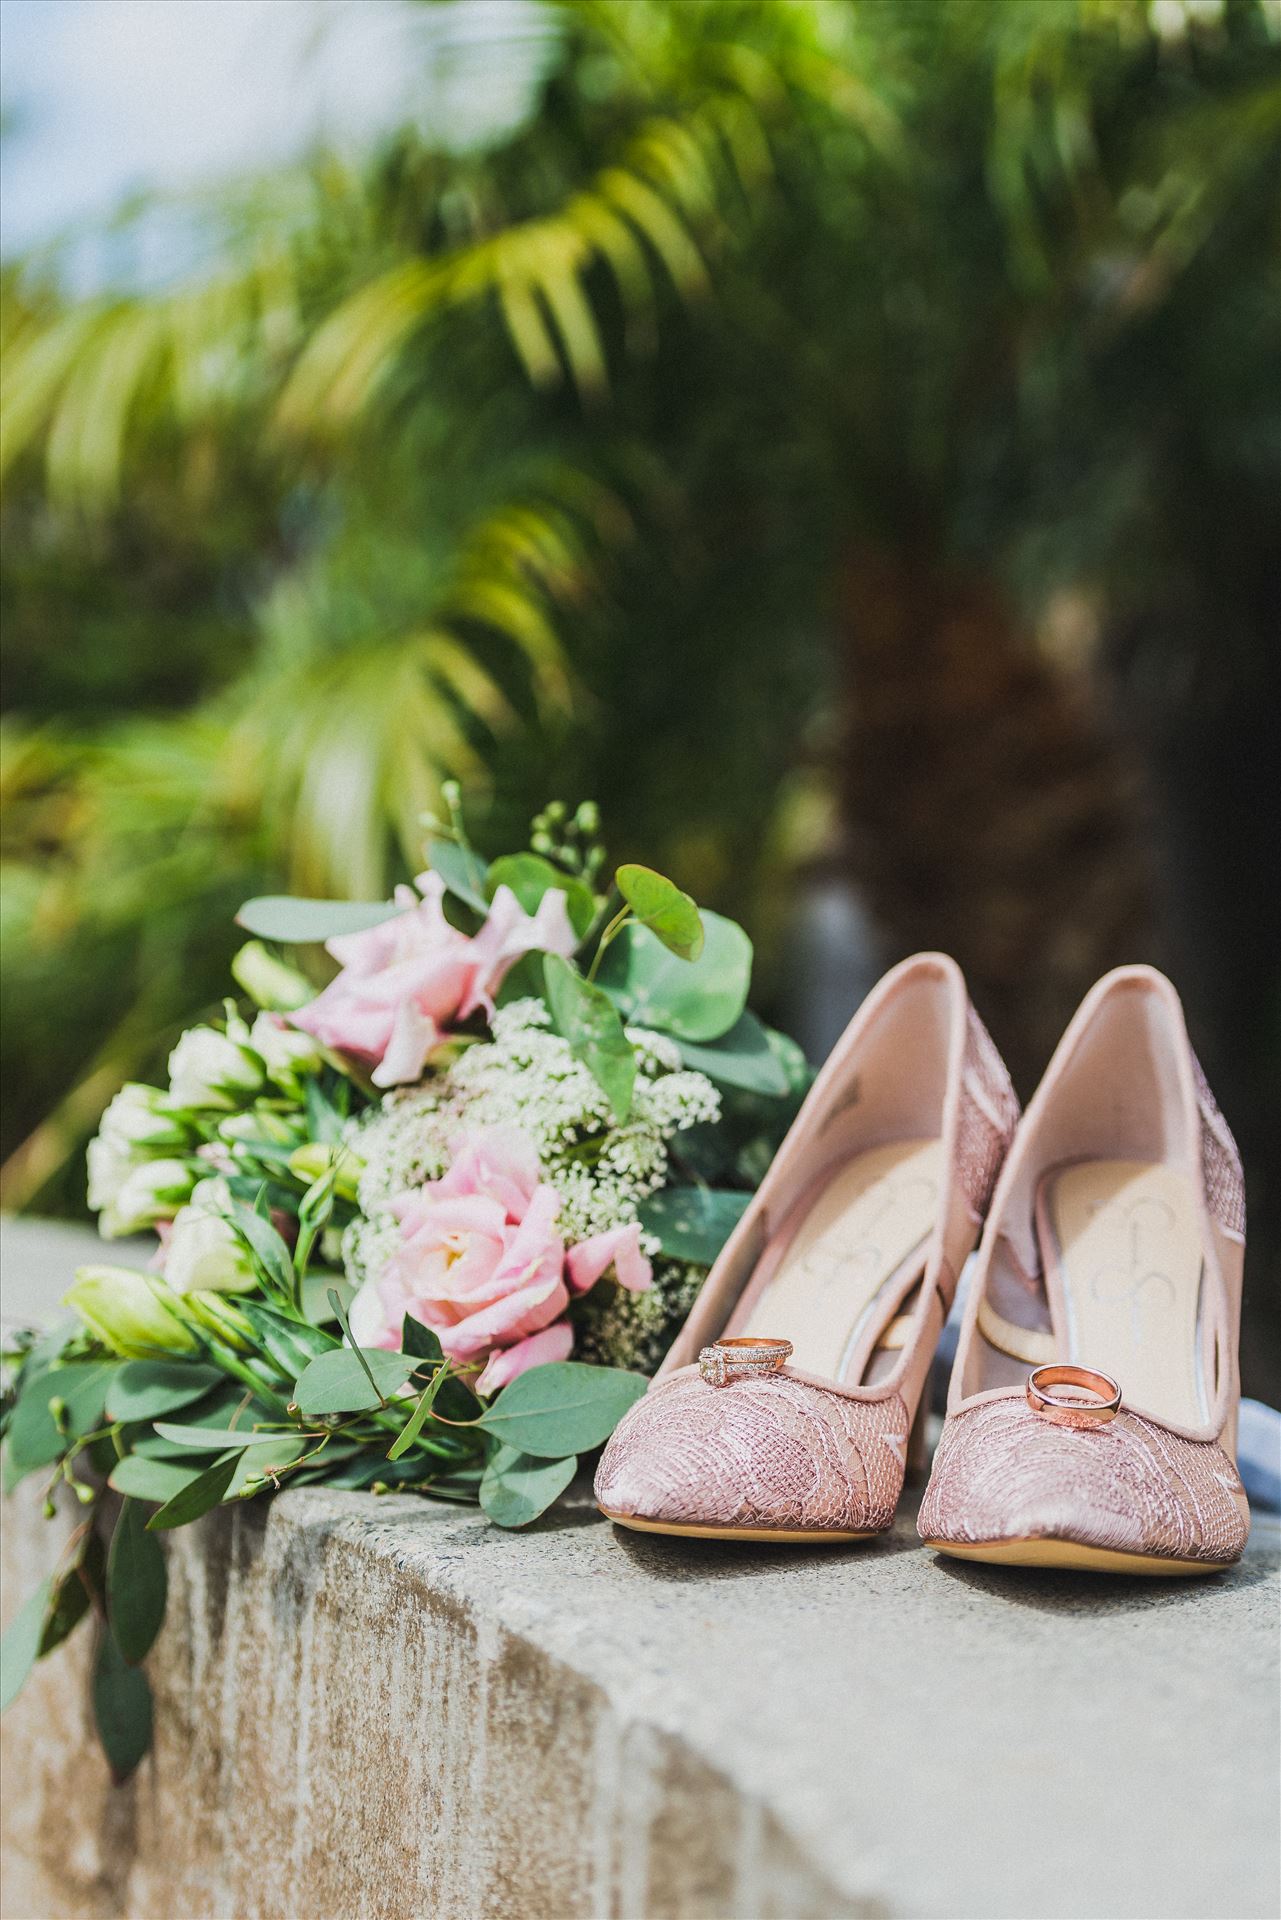 Candy and Christopher 08 Wedding at Dolphin Bay Resort and Spa in Shell Beach, California by Sarah Williams of Mirror's Edge Photography, a San Luis Obispo County Wedding Photographer. Shoes, flowers and rings by Sarah Williams